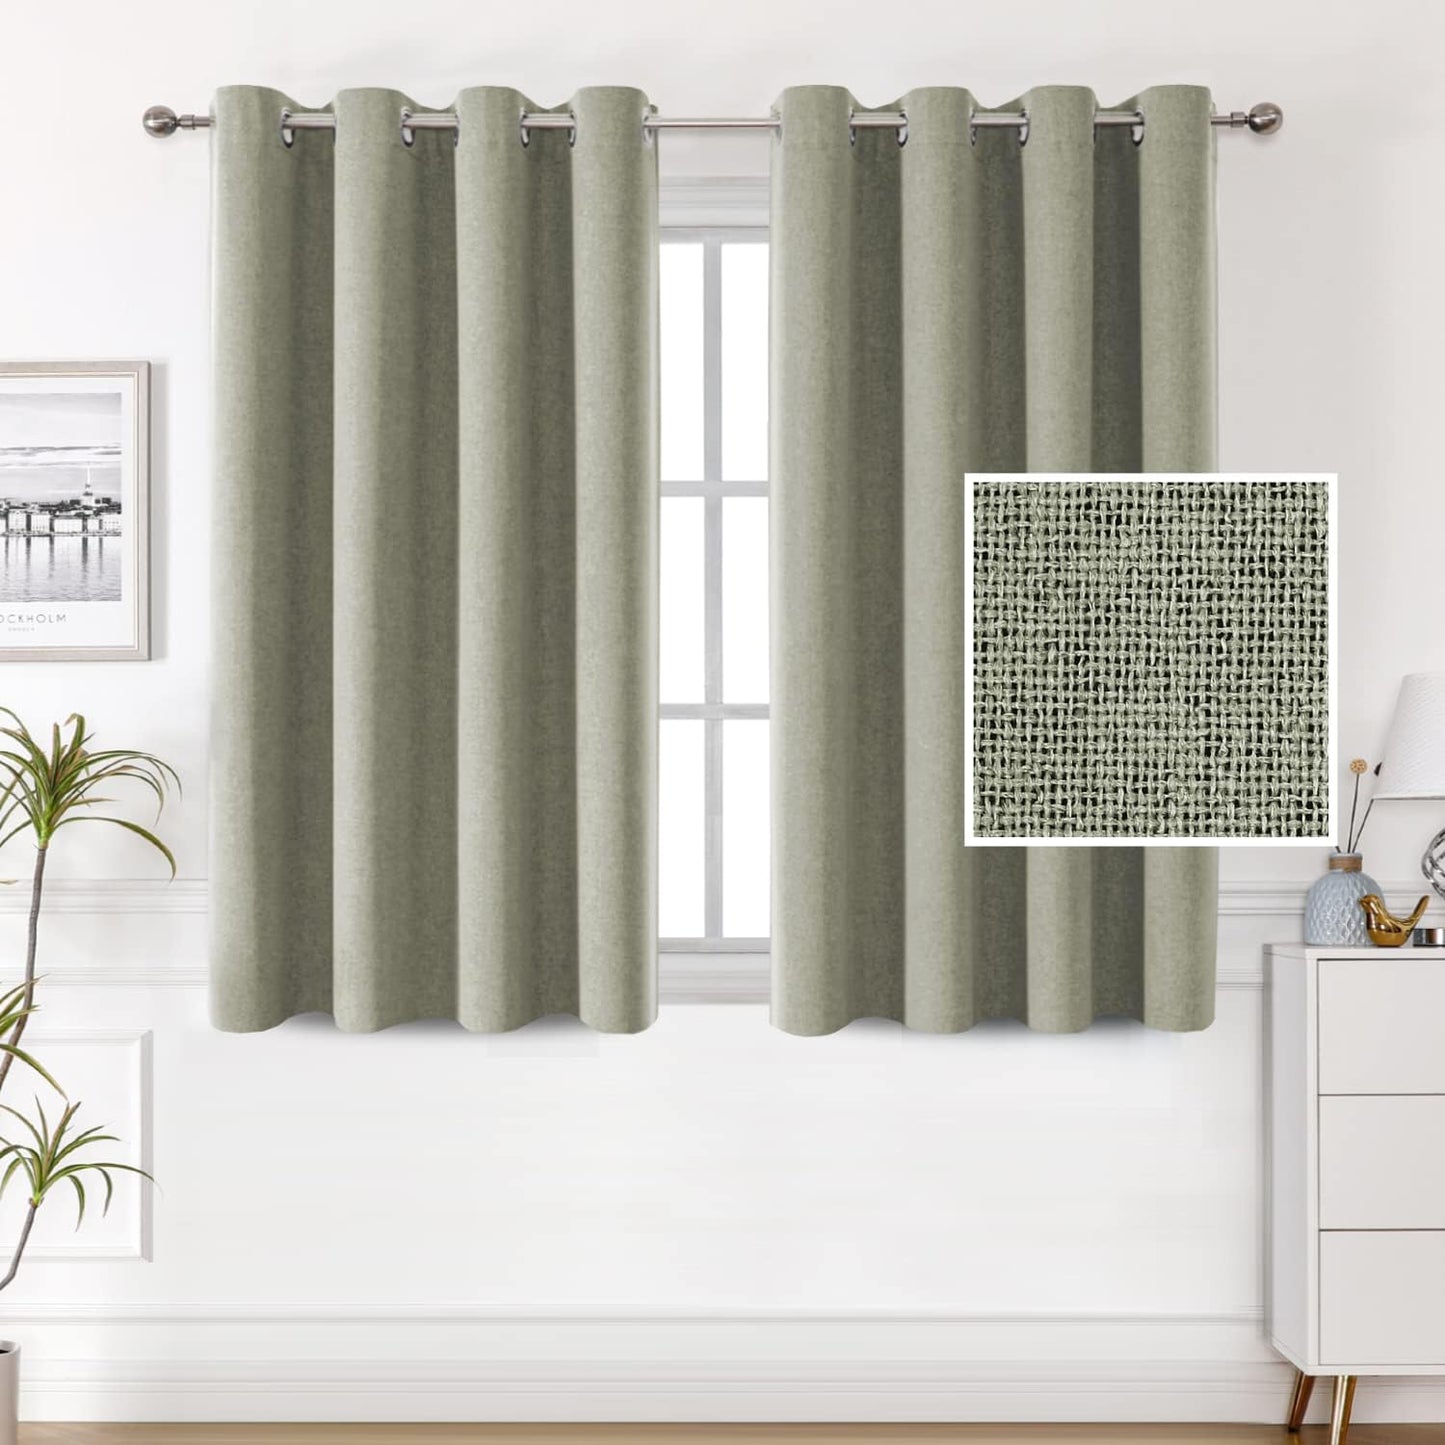 H.VERSAILTEX 100% Blackout Linen Look Curtains Thermal Insulated Curtains for Living Room Textured Burlap Drapes for Bedroom Grommet Linen Noise Blocking Curtains 42 X 84 Inch, 2 Panels - Sage  H.VERSAILTEX Sage 52"W X 54"L 